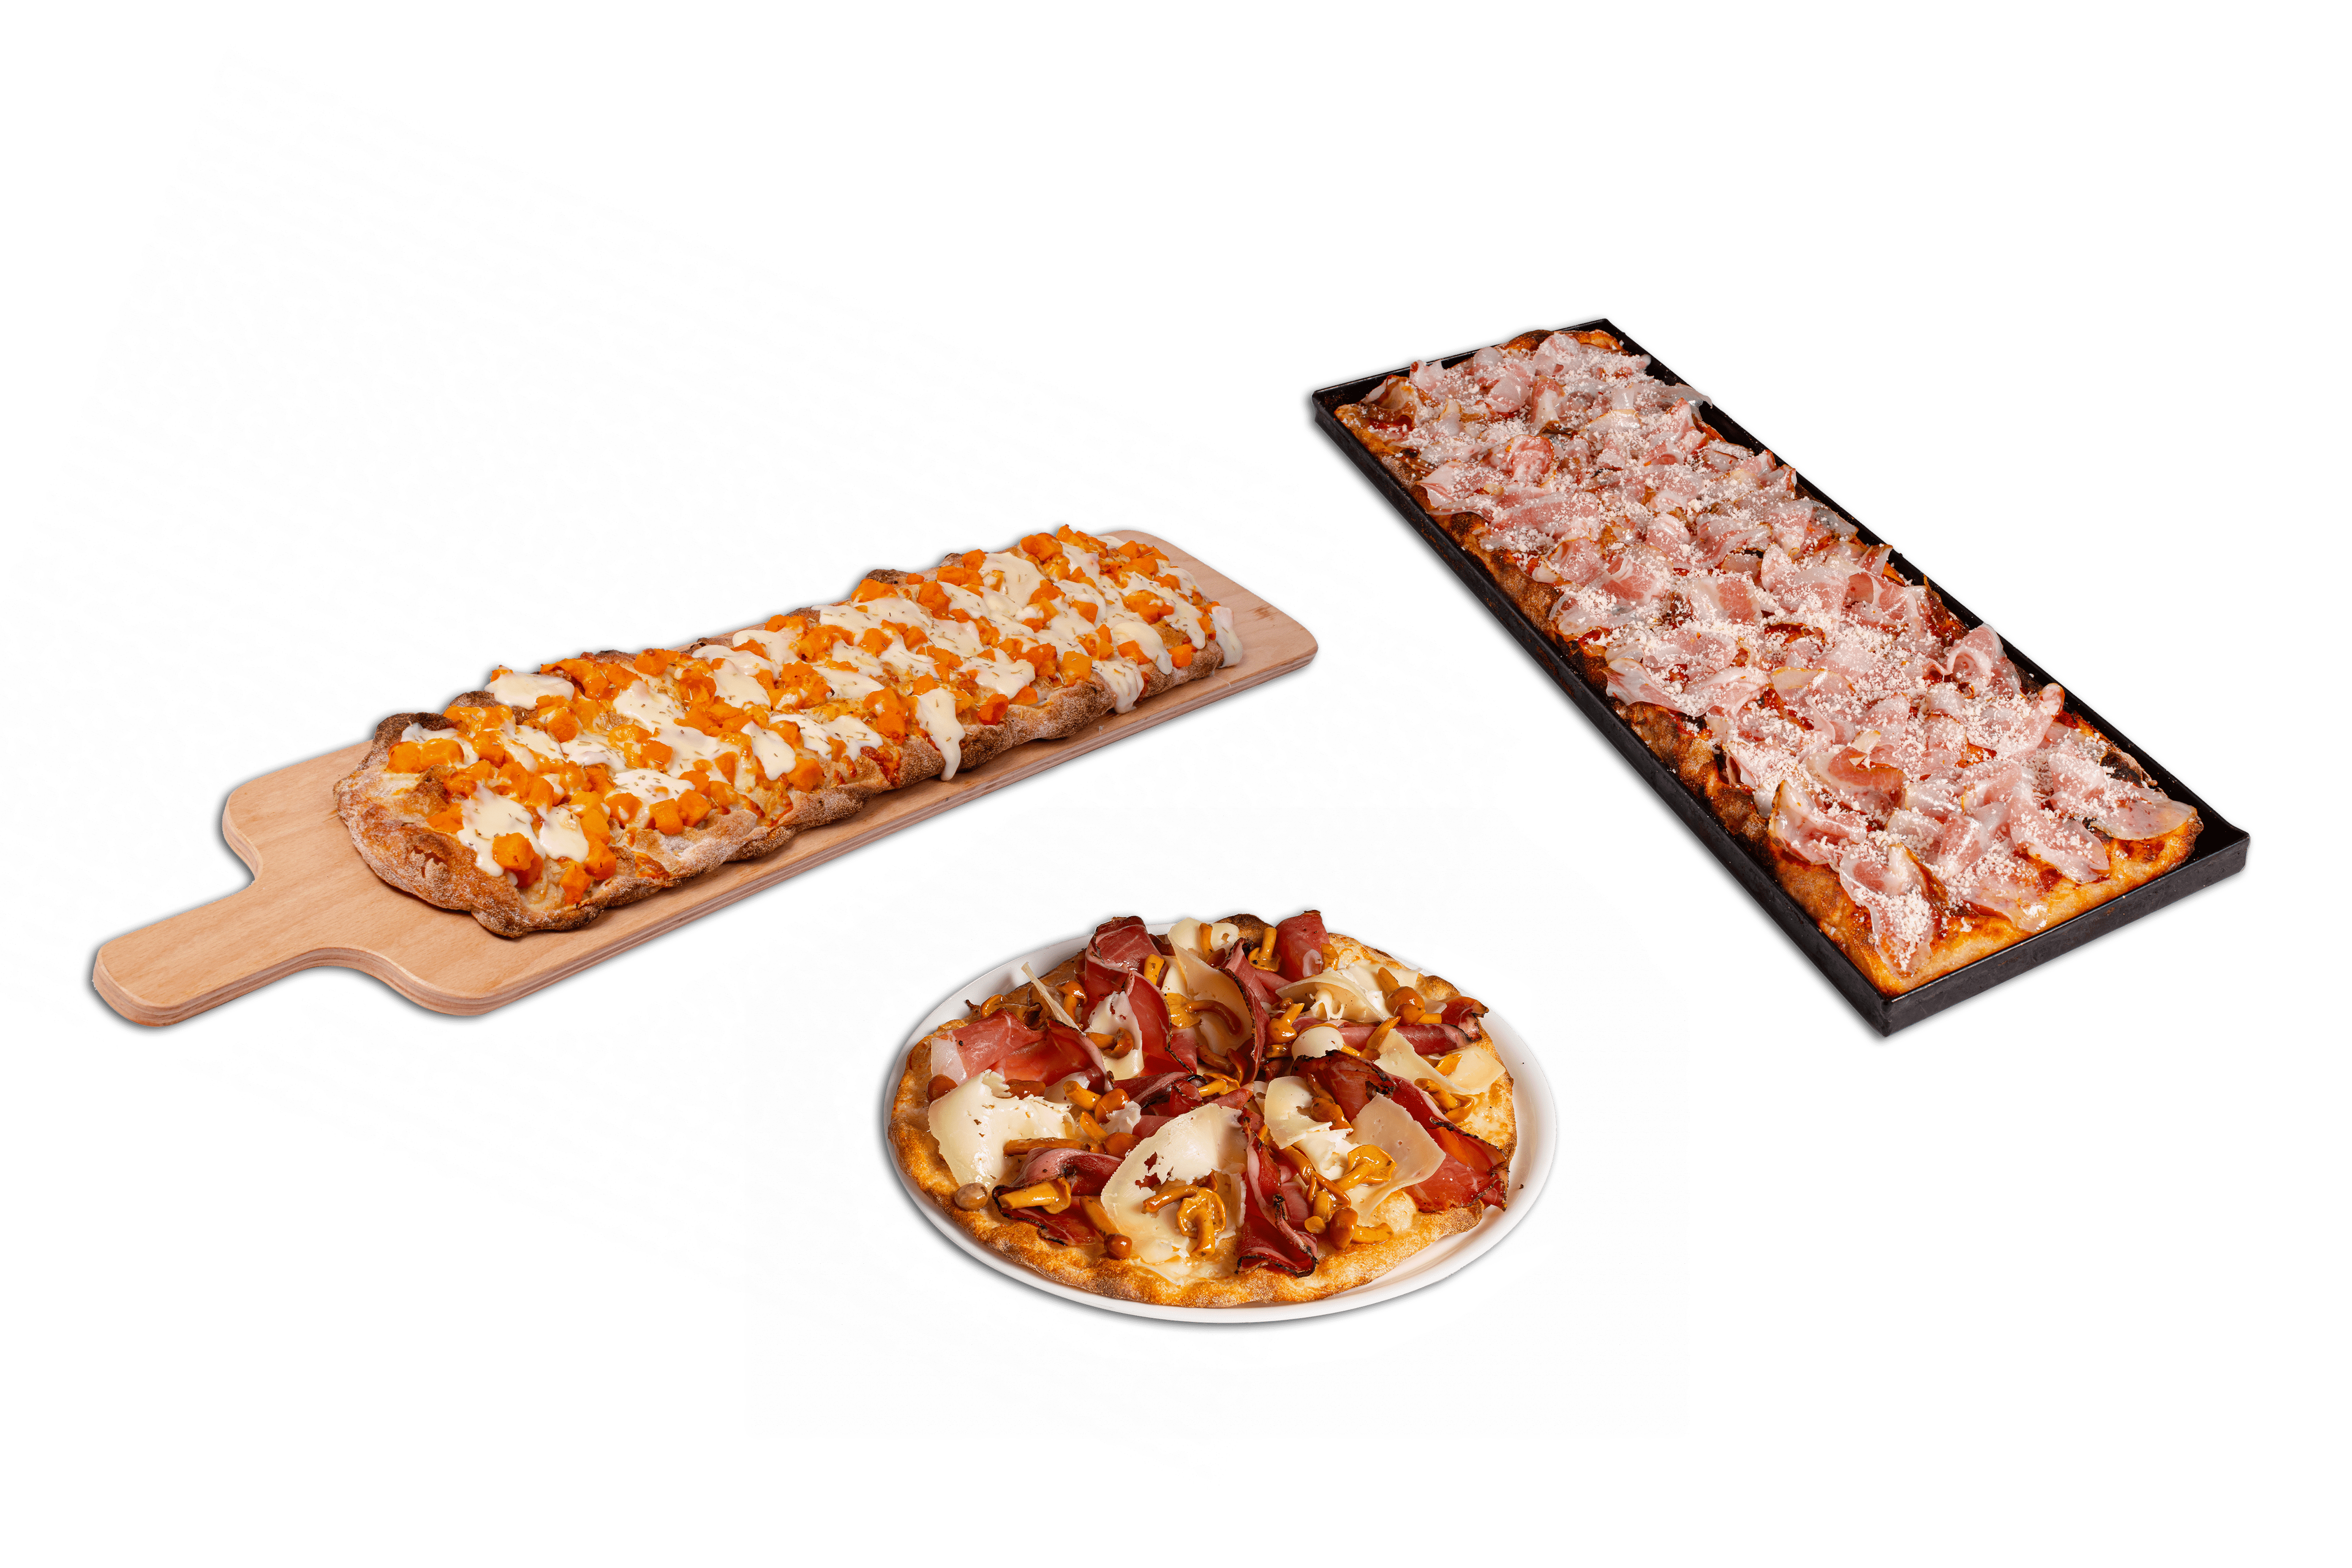 Pictures of three pizzas